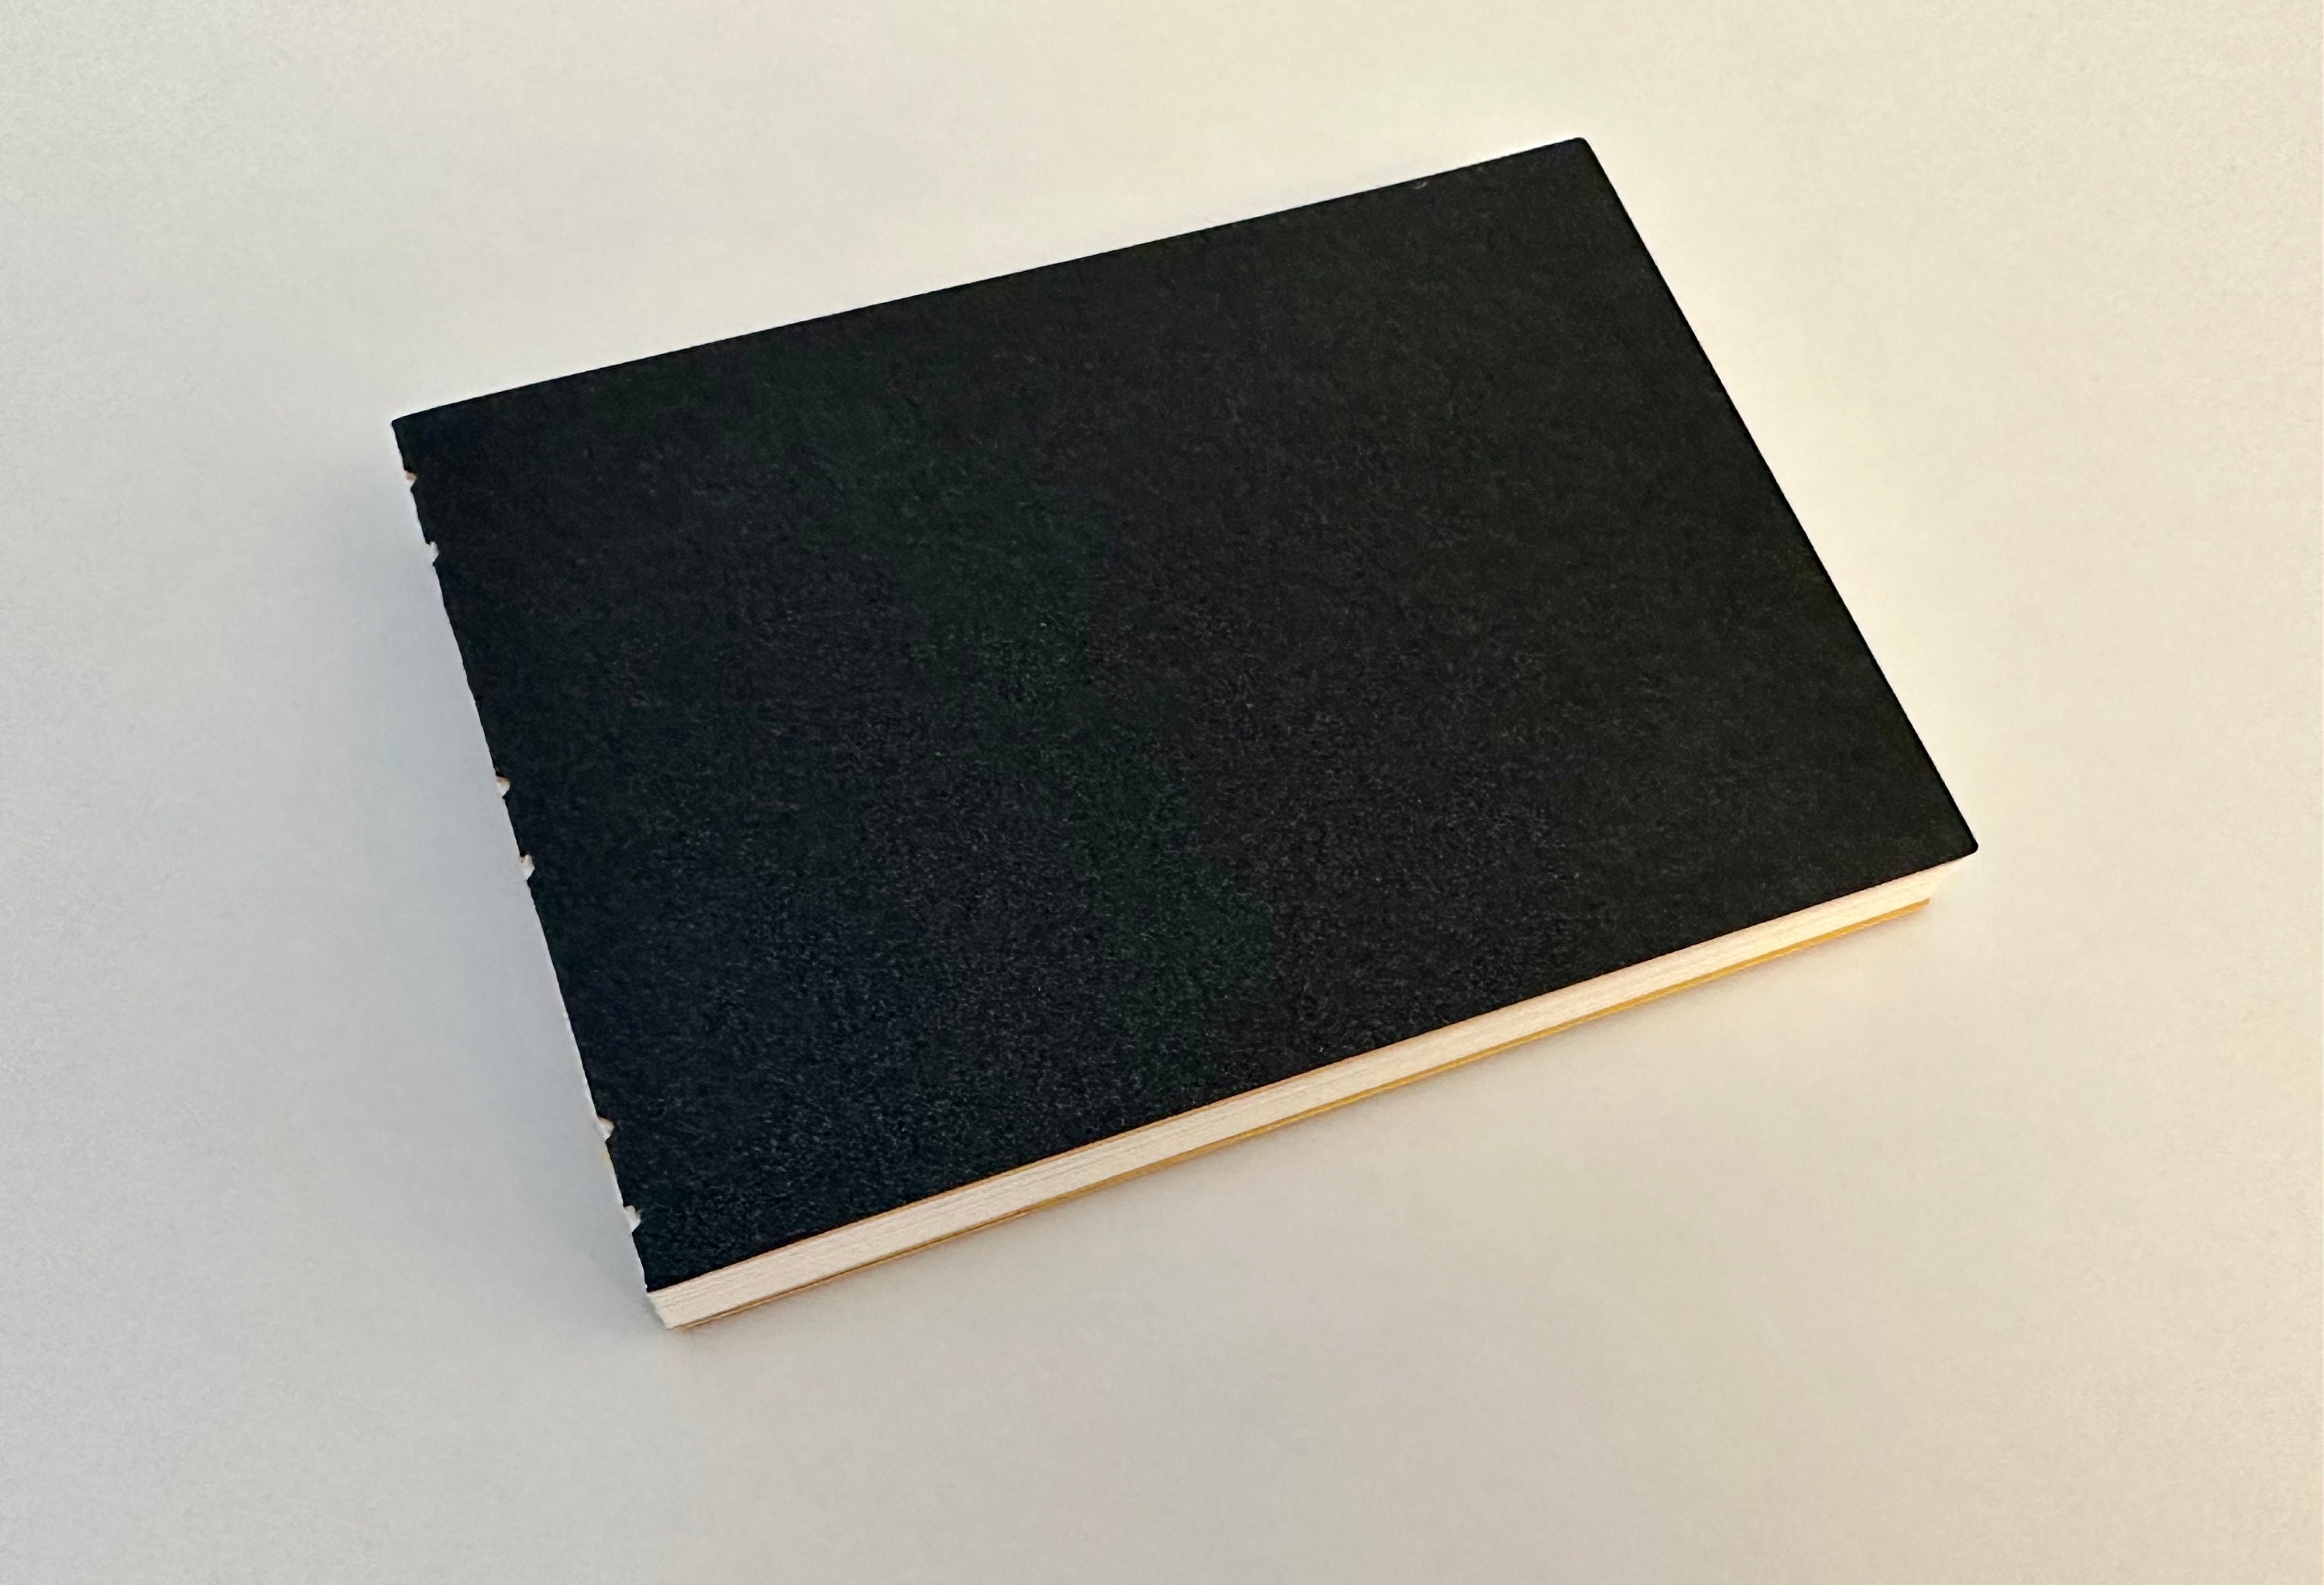 LAY FLAT sketchbook. Removable sheet, journal style SIMPLE SKETCH book –  Design Ideation Studio